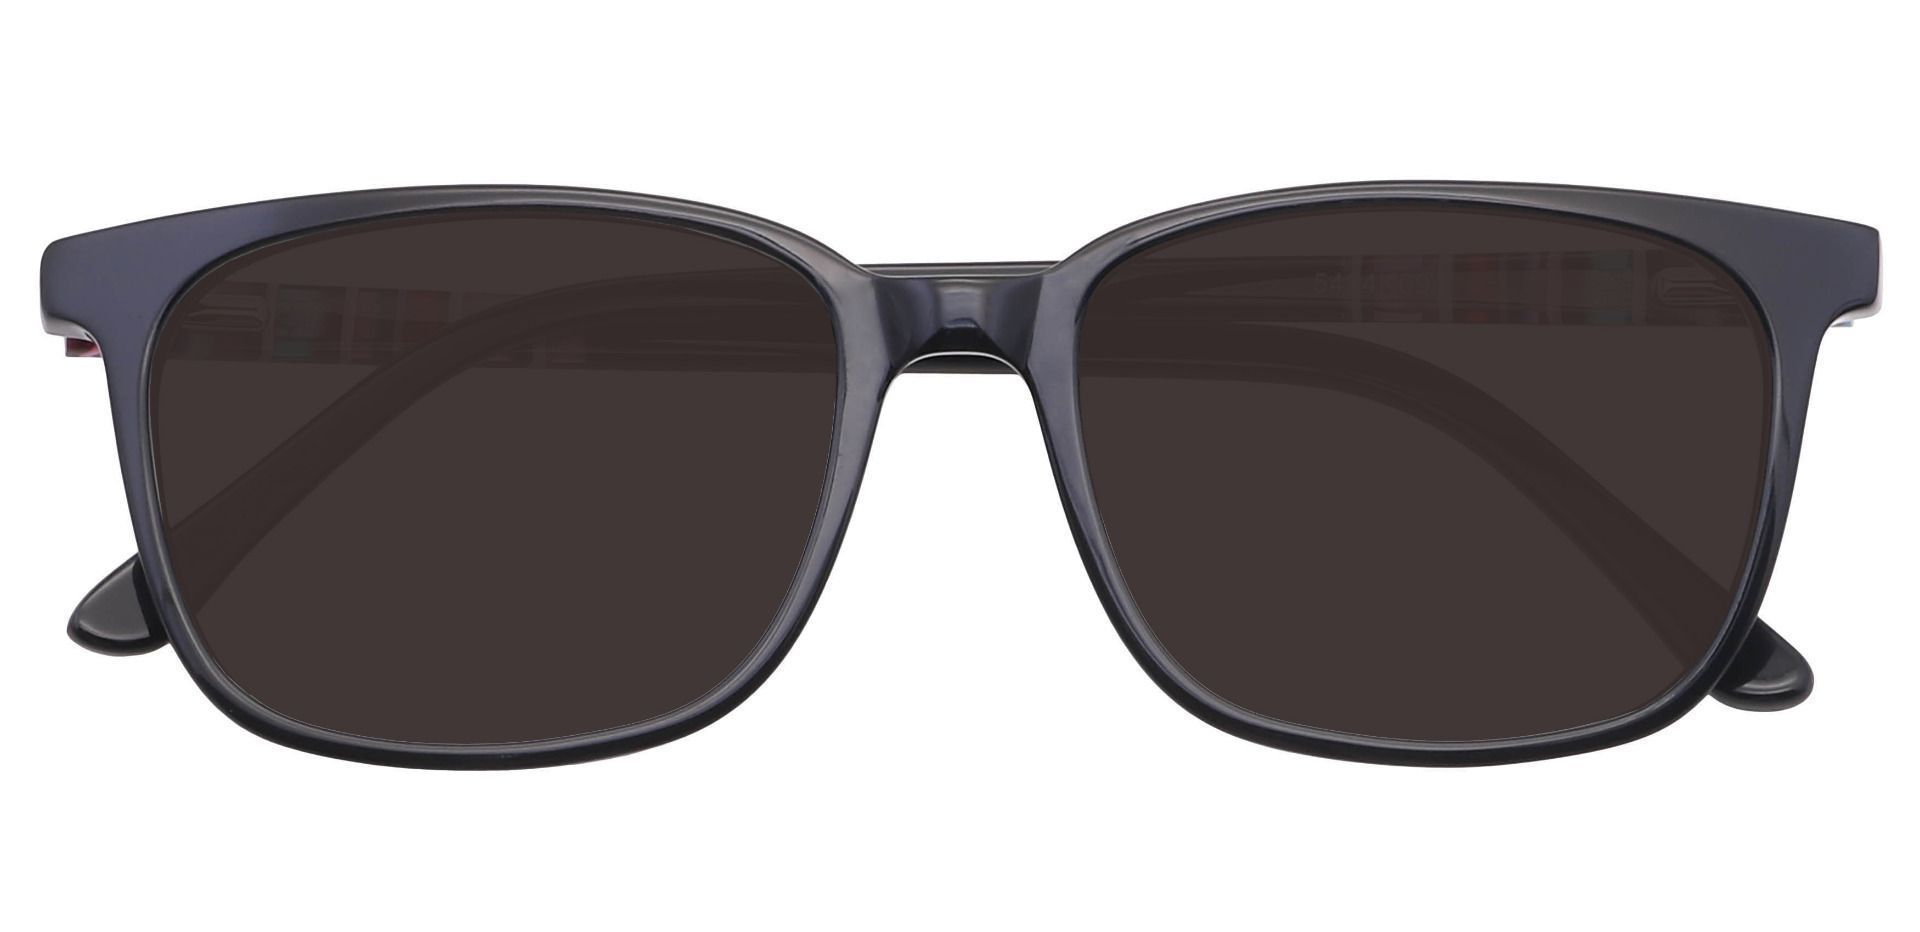 Fern Square Lined Bifocal Sunglasses - Black Frame With Gray Lenses